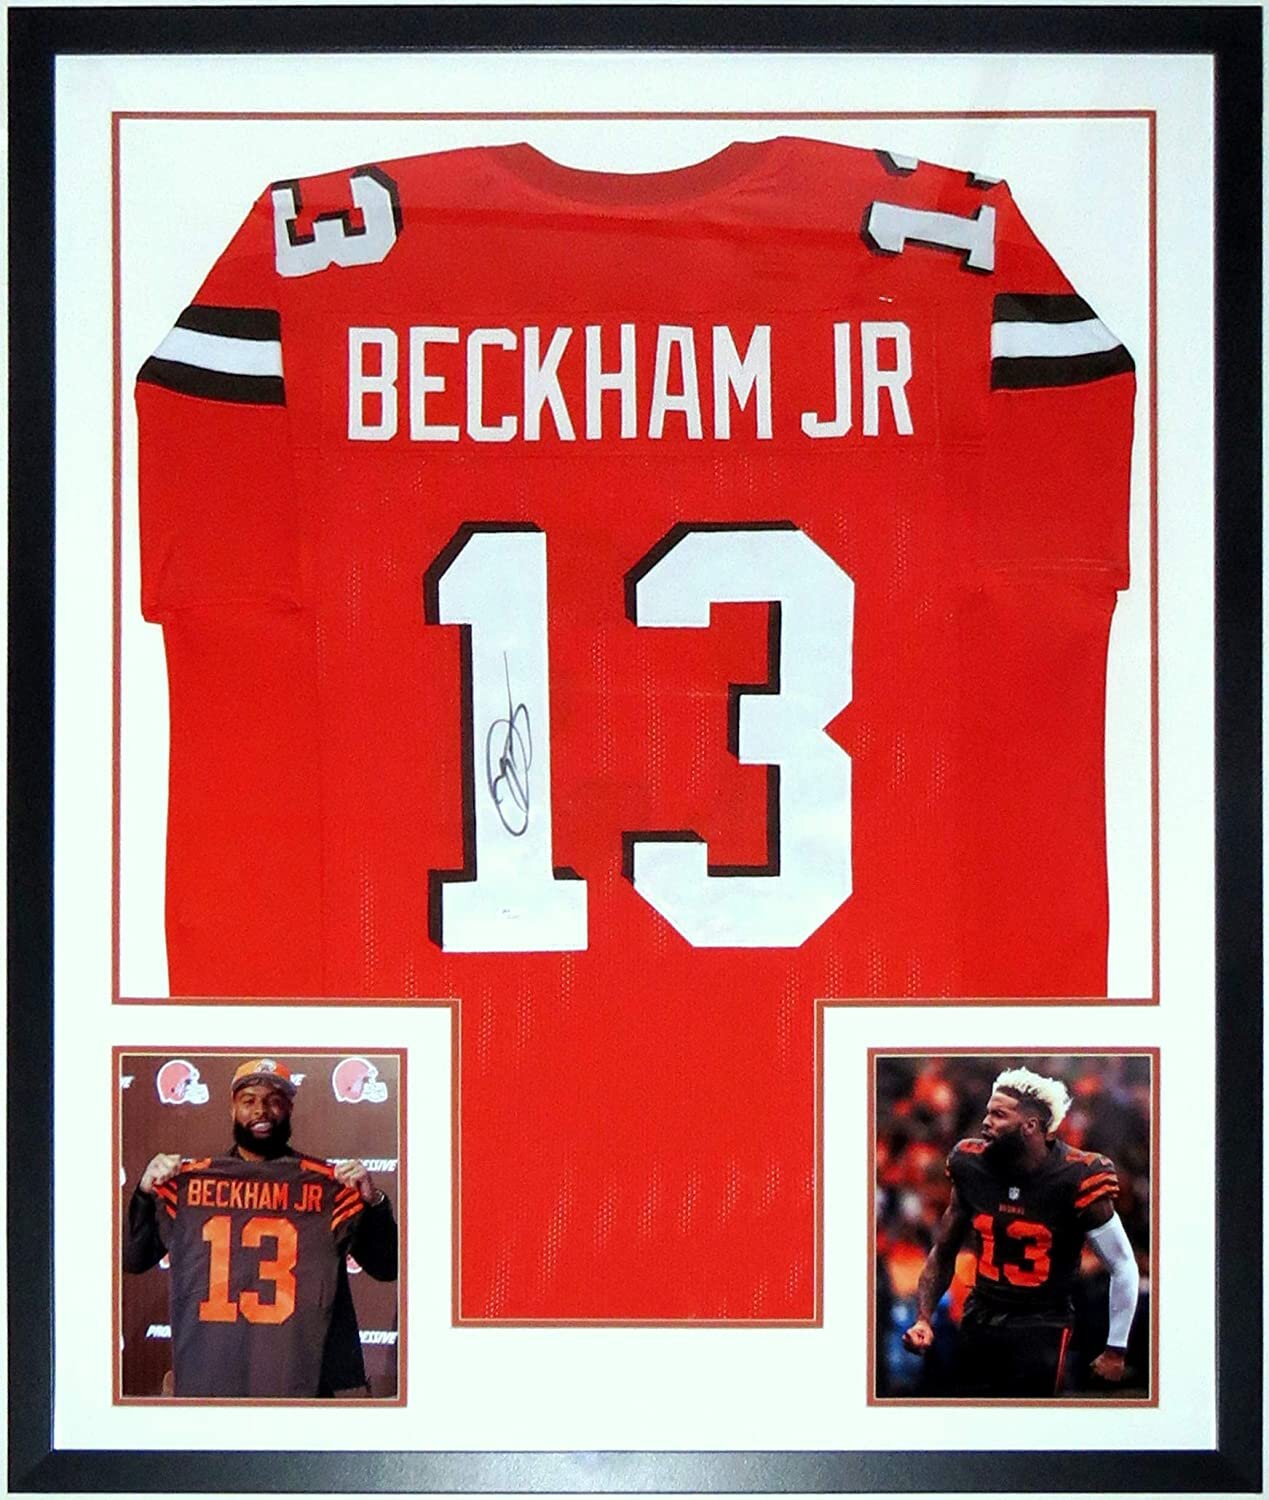 browns odell jersey